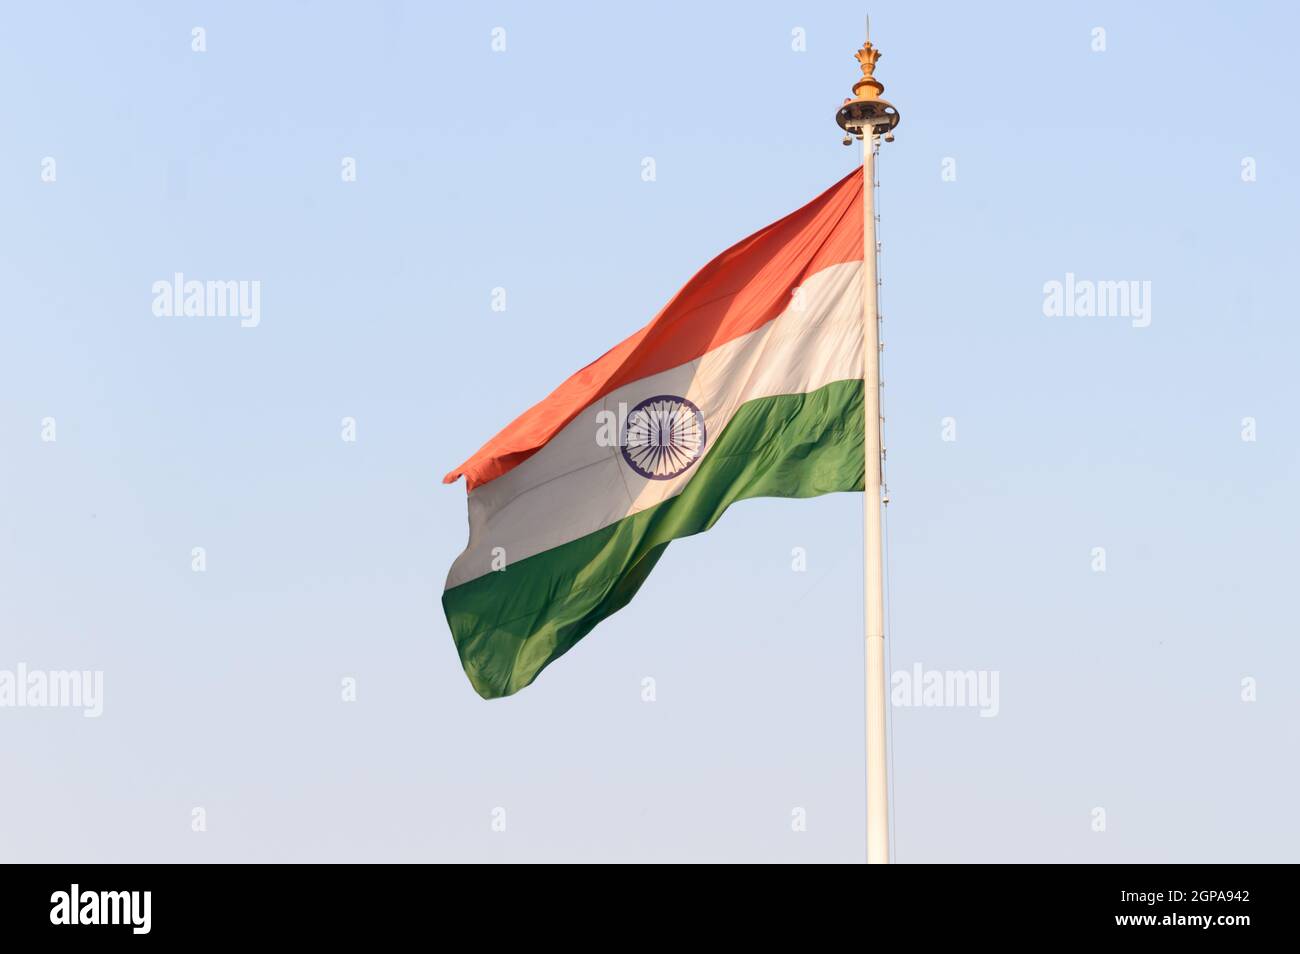 Indian flag flying against blue sky background. The National Flag of India is a horizontal rectangular tricolor (saffron, white and green color) with Stock Photo